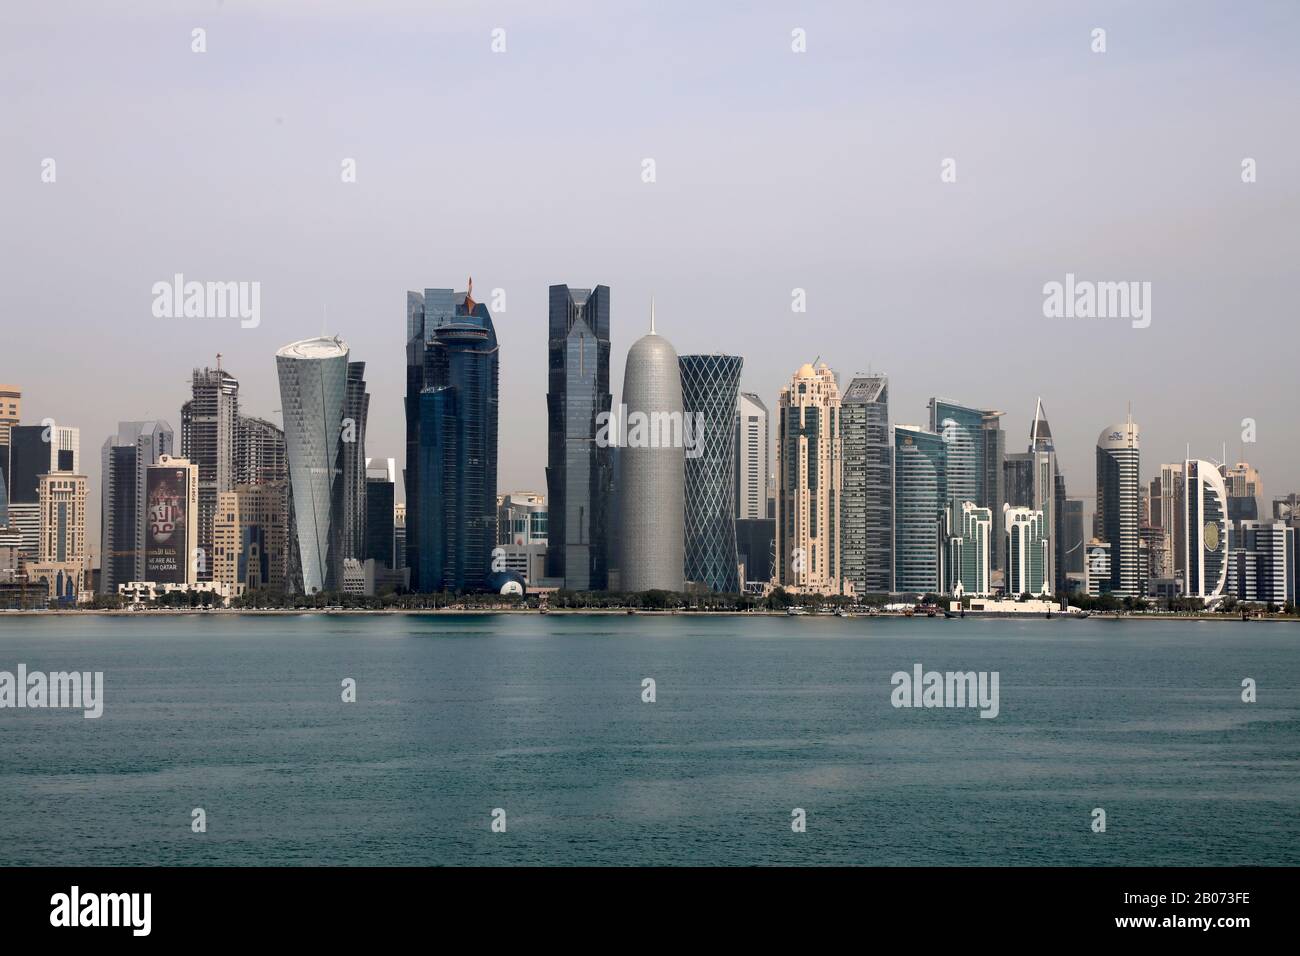 Doha / Qatar – February 18, 2020: View of the towers of the West Bay area of Doha, the city’s main business district Stock Photo